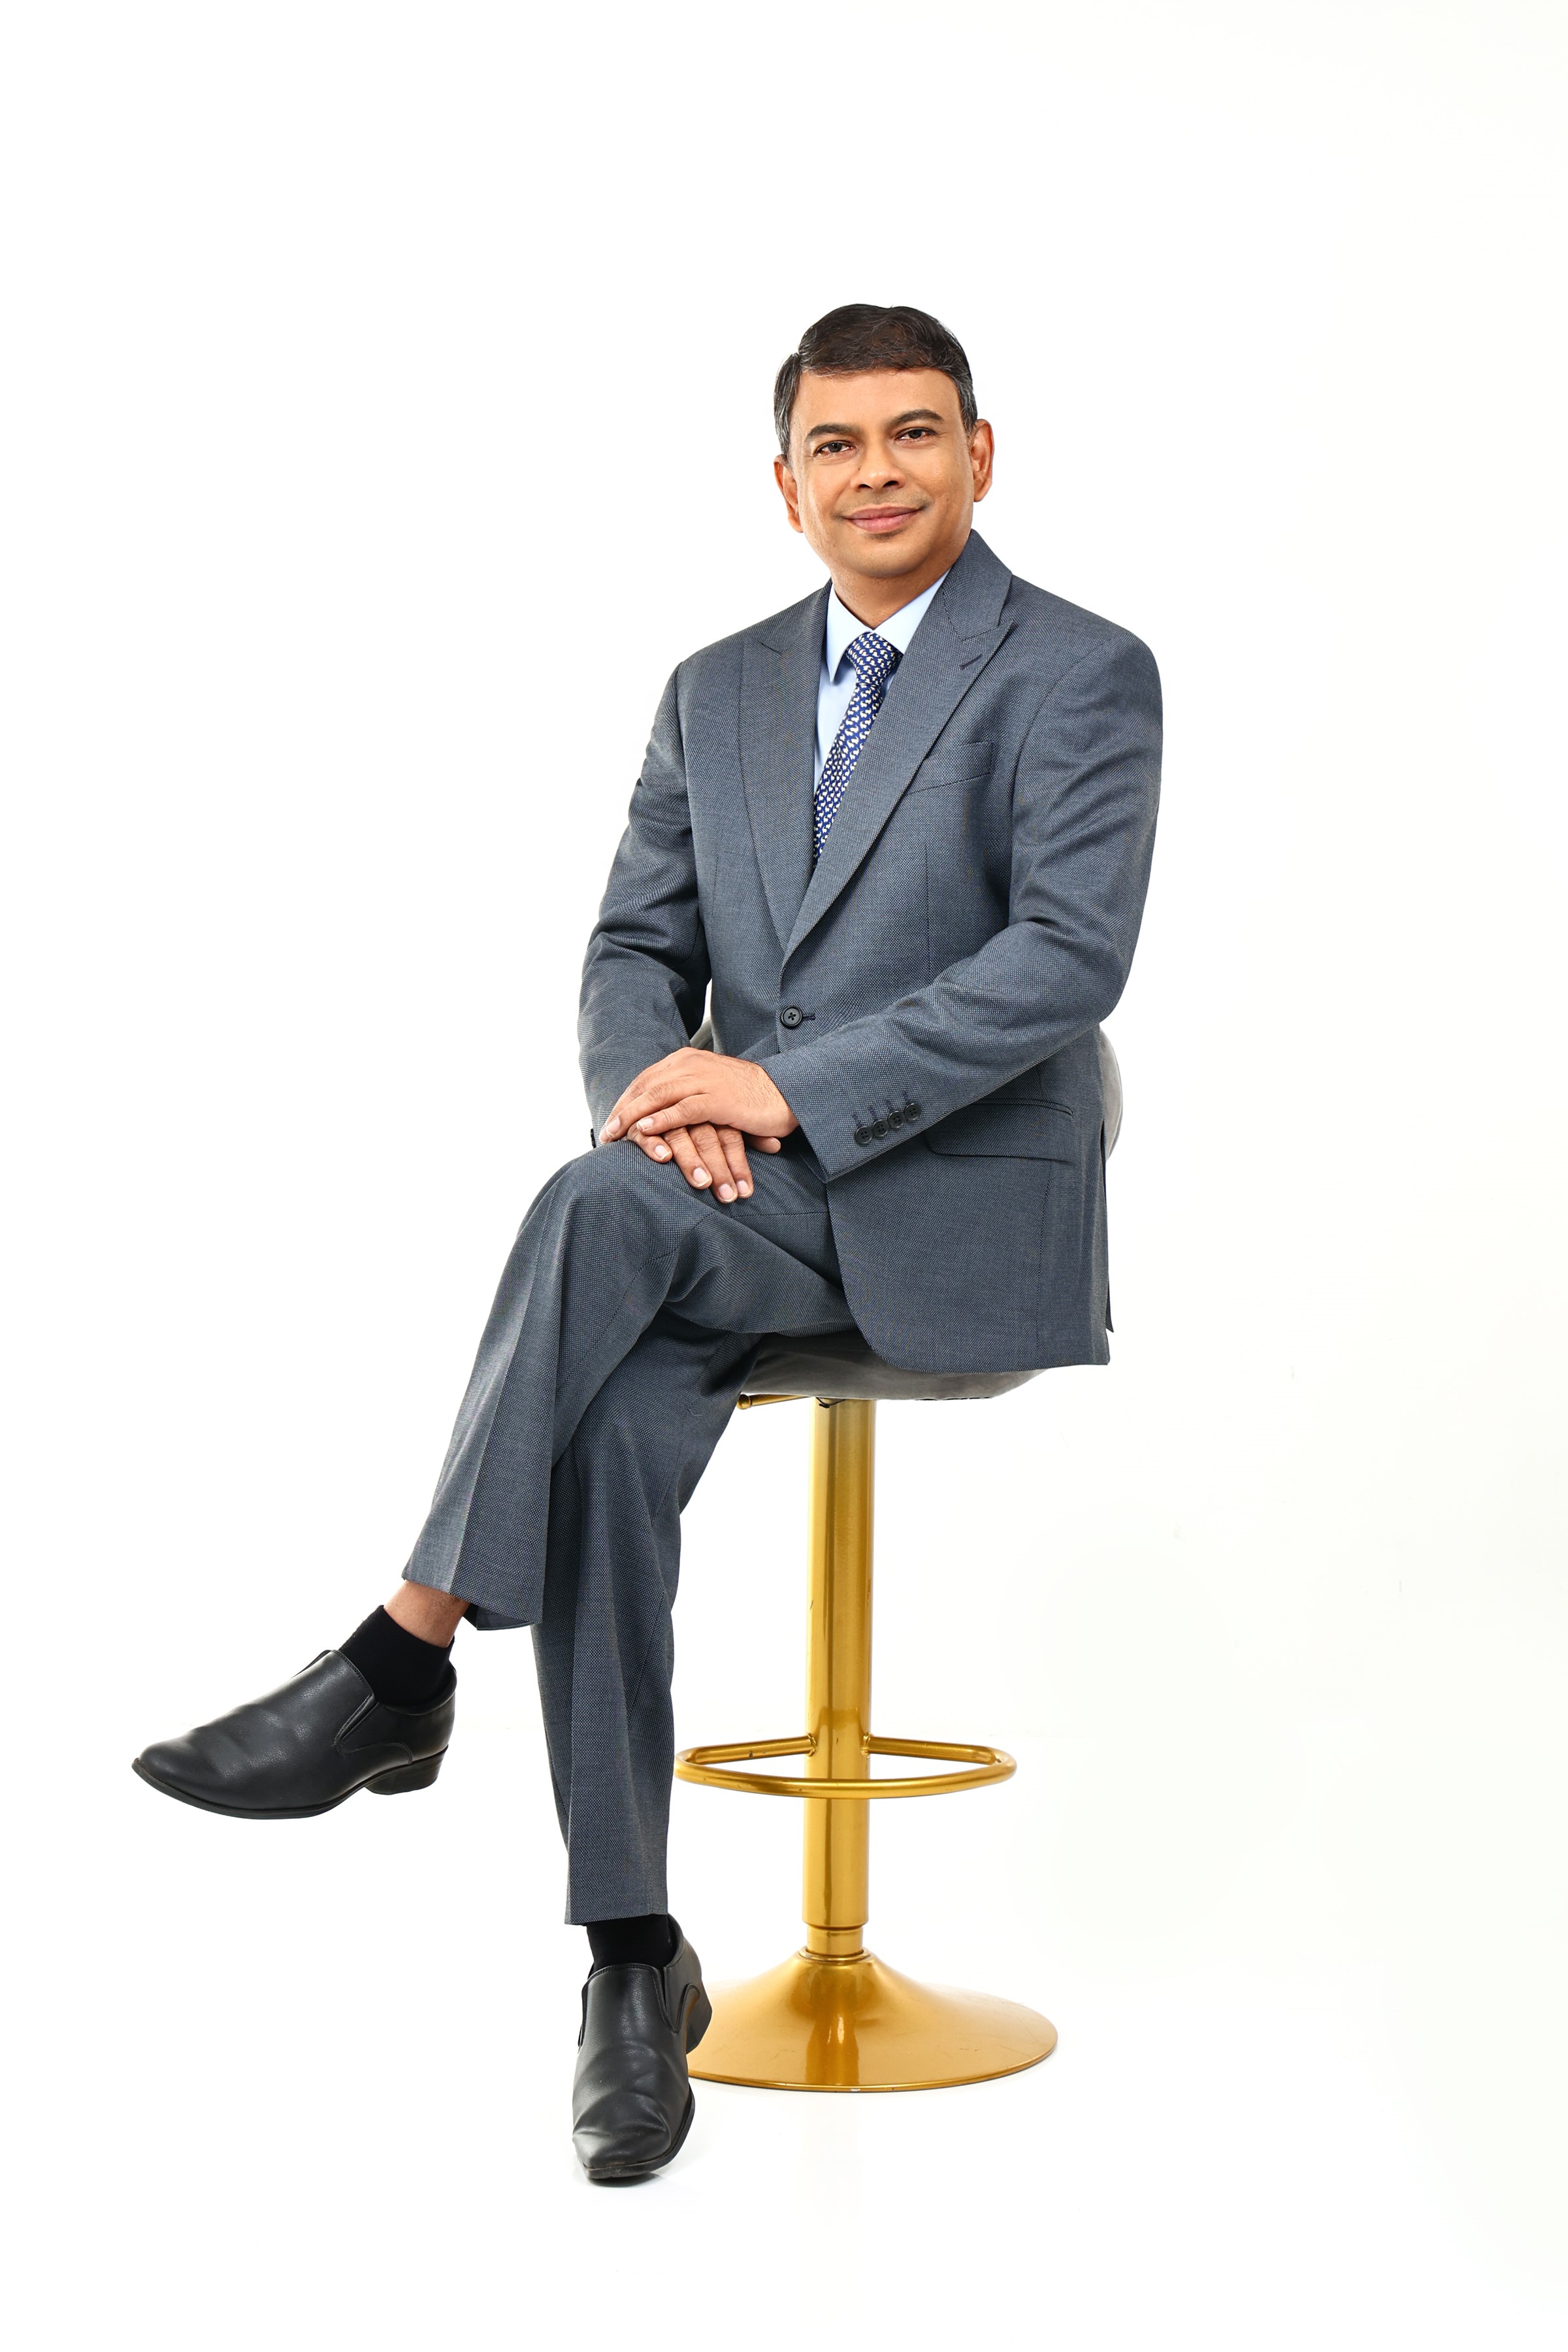 Redington Limited appoints Mr. V S Hariharan as the Group CEO